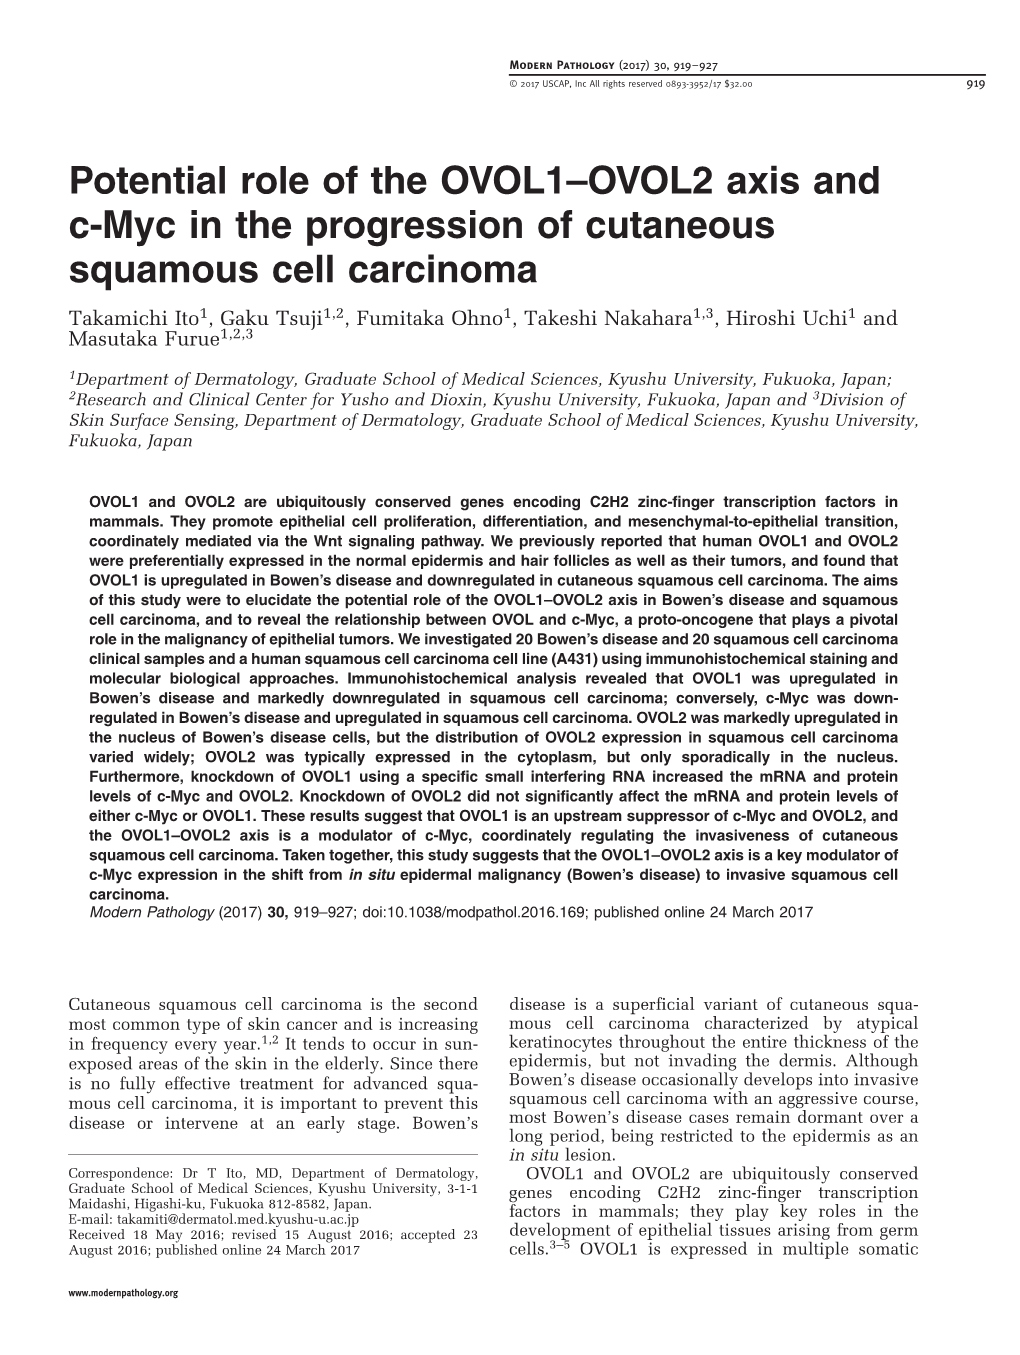 OVOL2 Axis and C-Myc in the Progression of Cutaneous